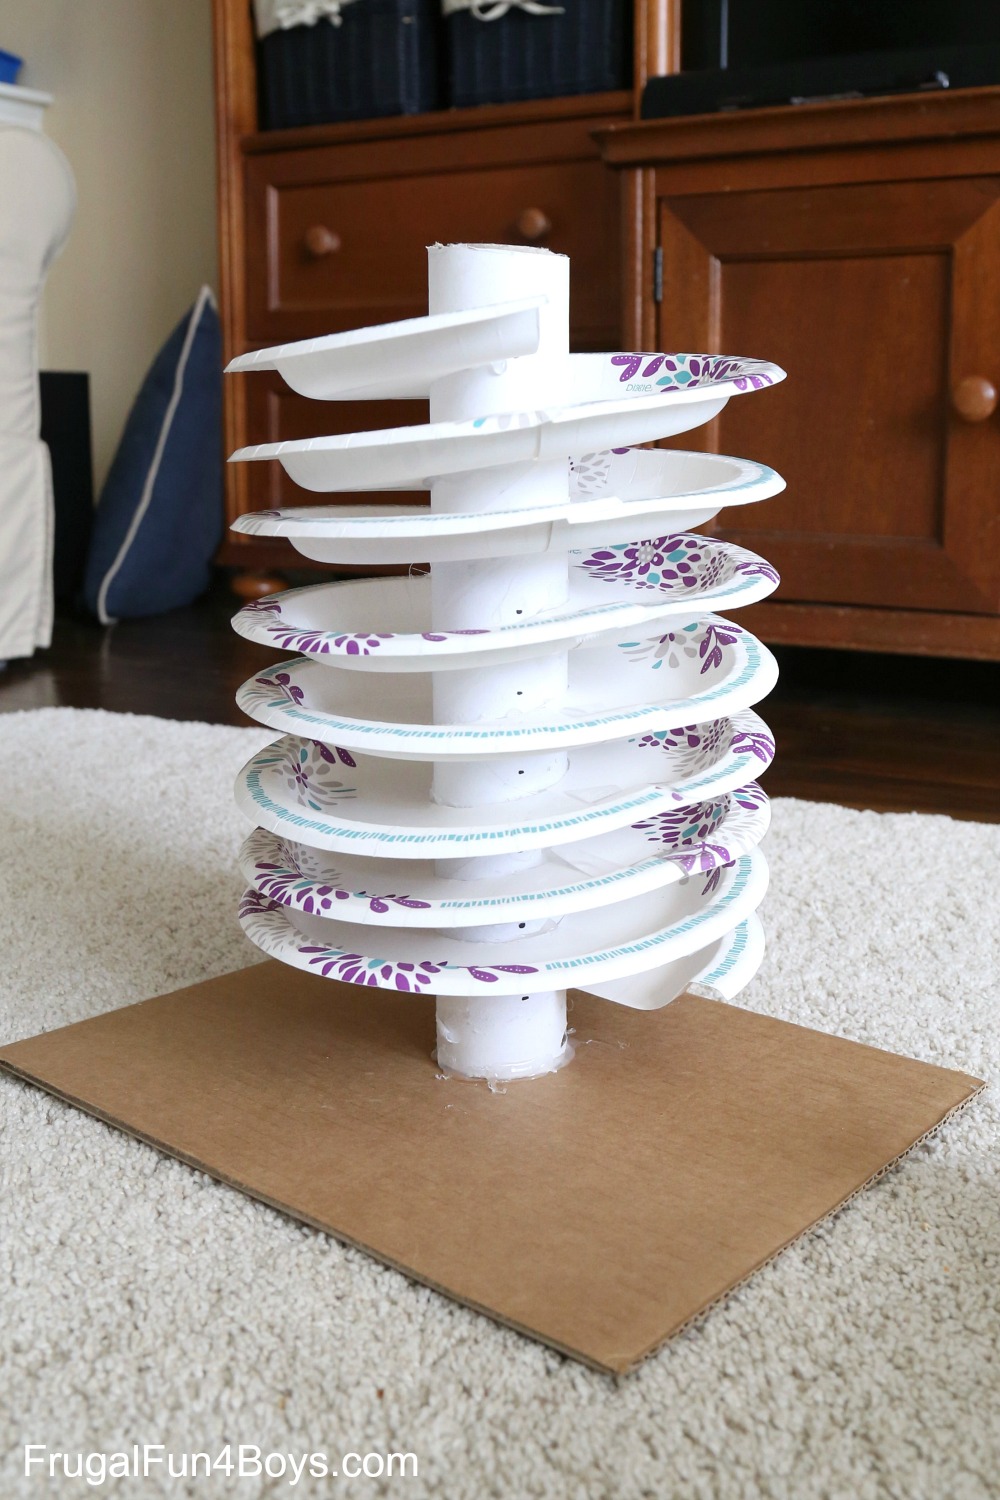 Did you know you can make Spiral Marble tracks with Plate Plates - Easy